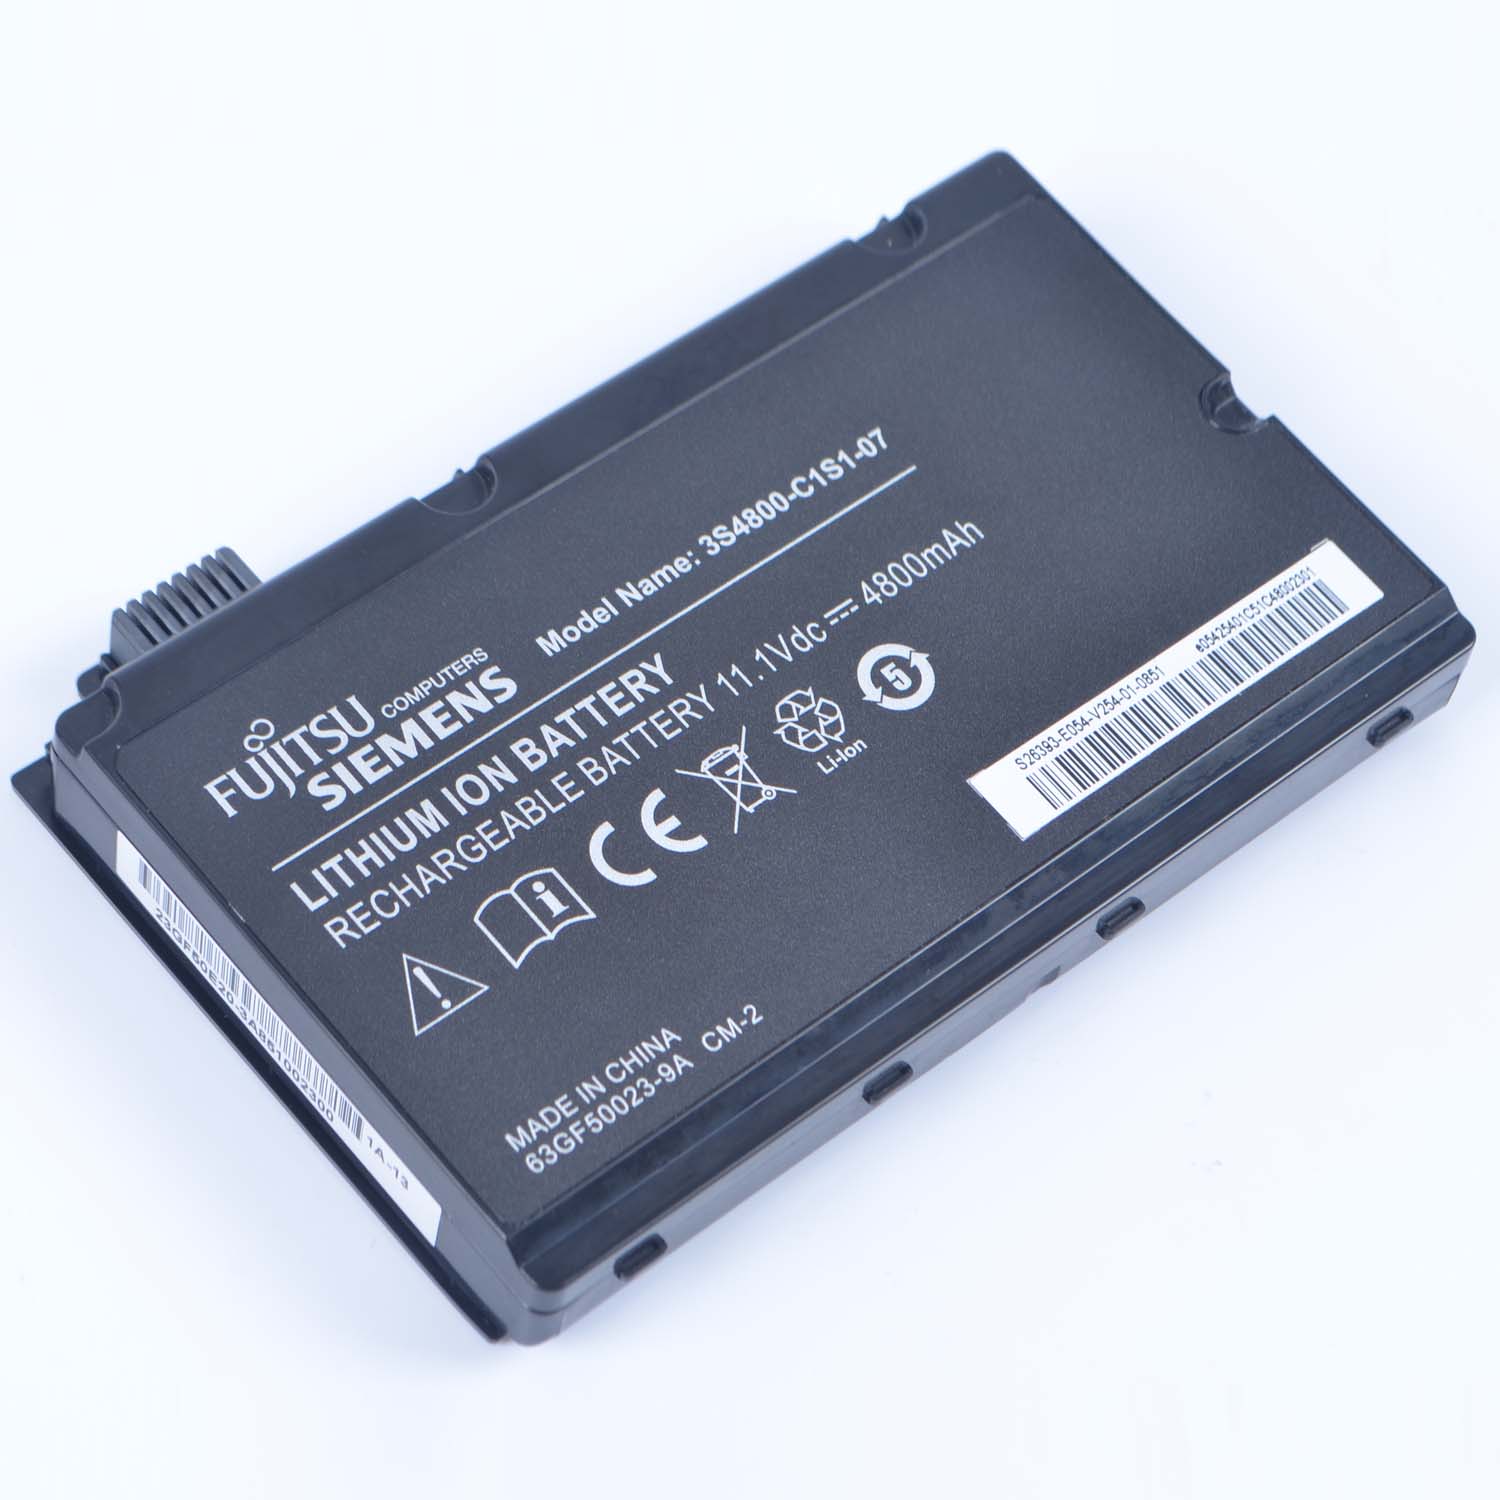 Replacement Battery for FUJITSU P55-4S4400-S1S5 battery